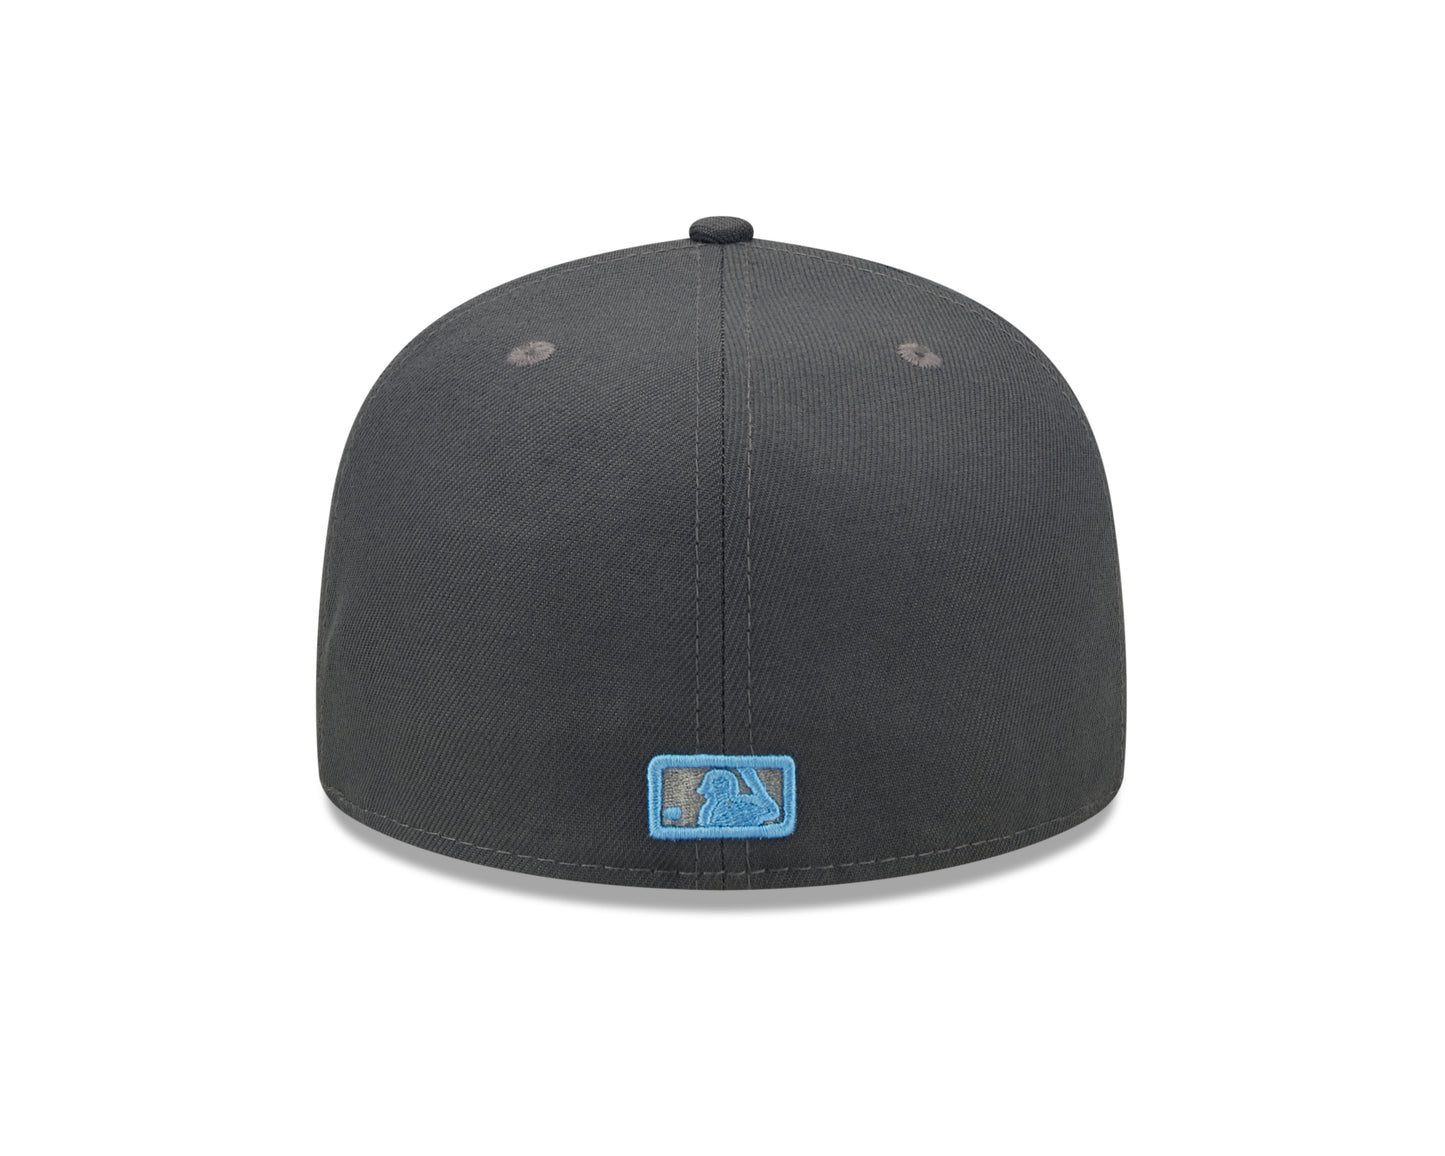 New York Yankees New Era Father's Day 59Fifty Hat